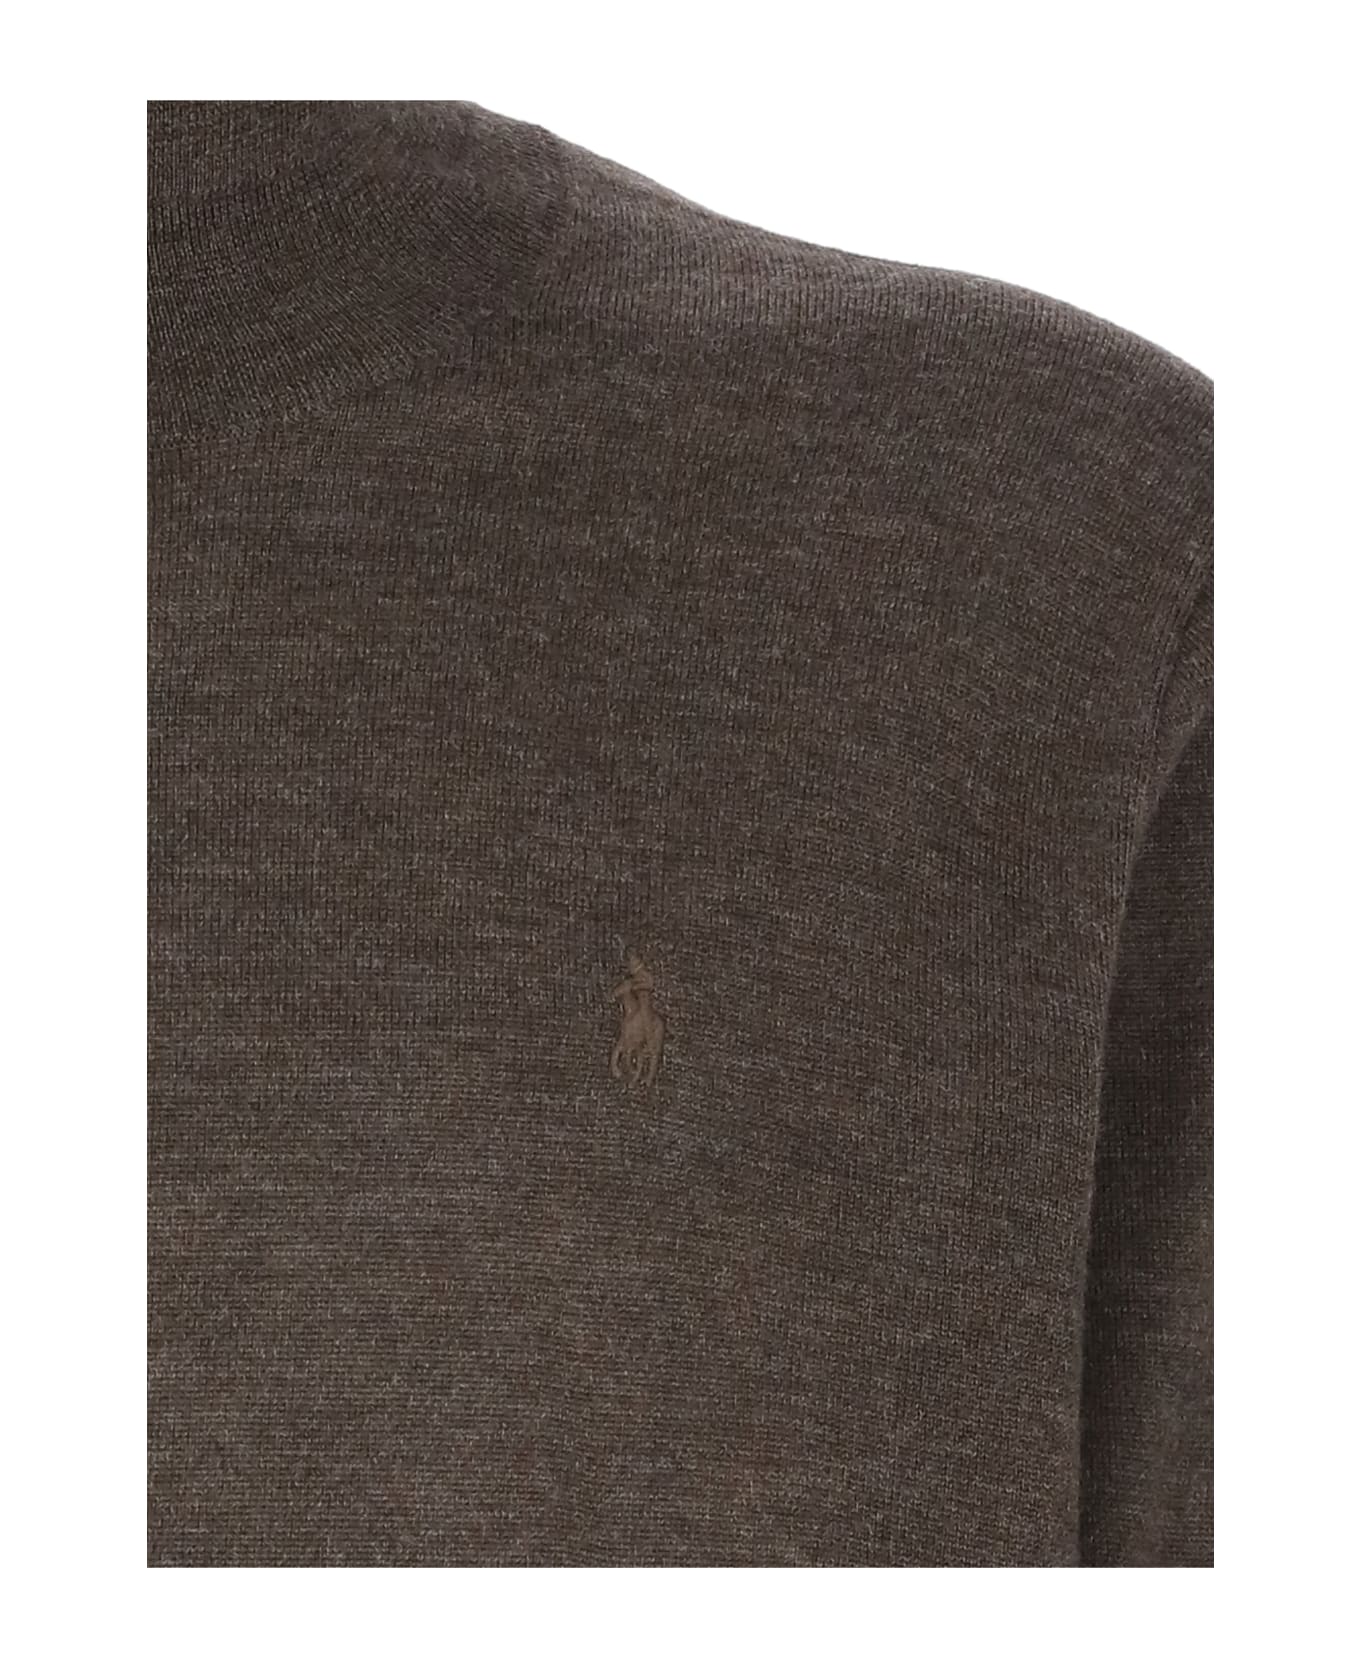 Polo Ralph Lauren Sweater With Pony Logo Top - Brown